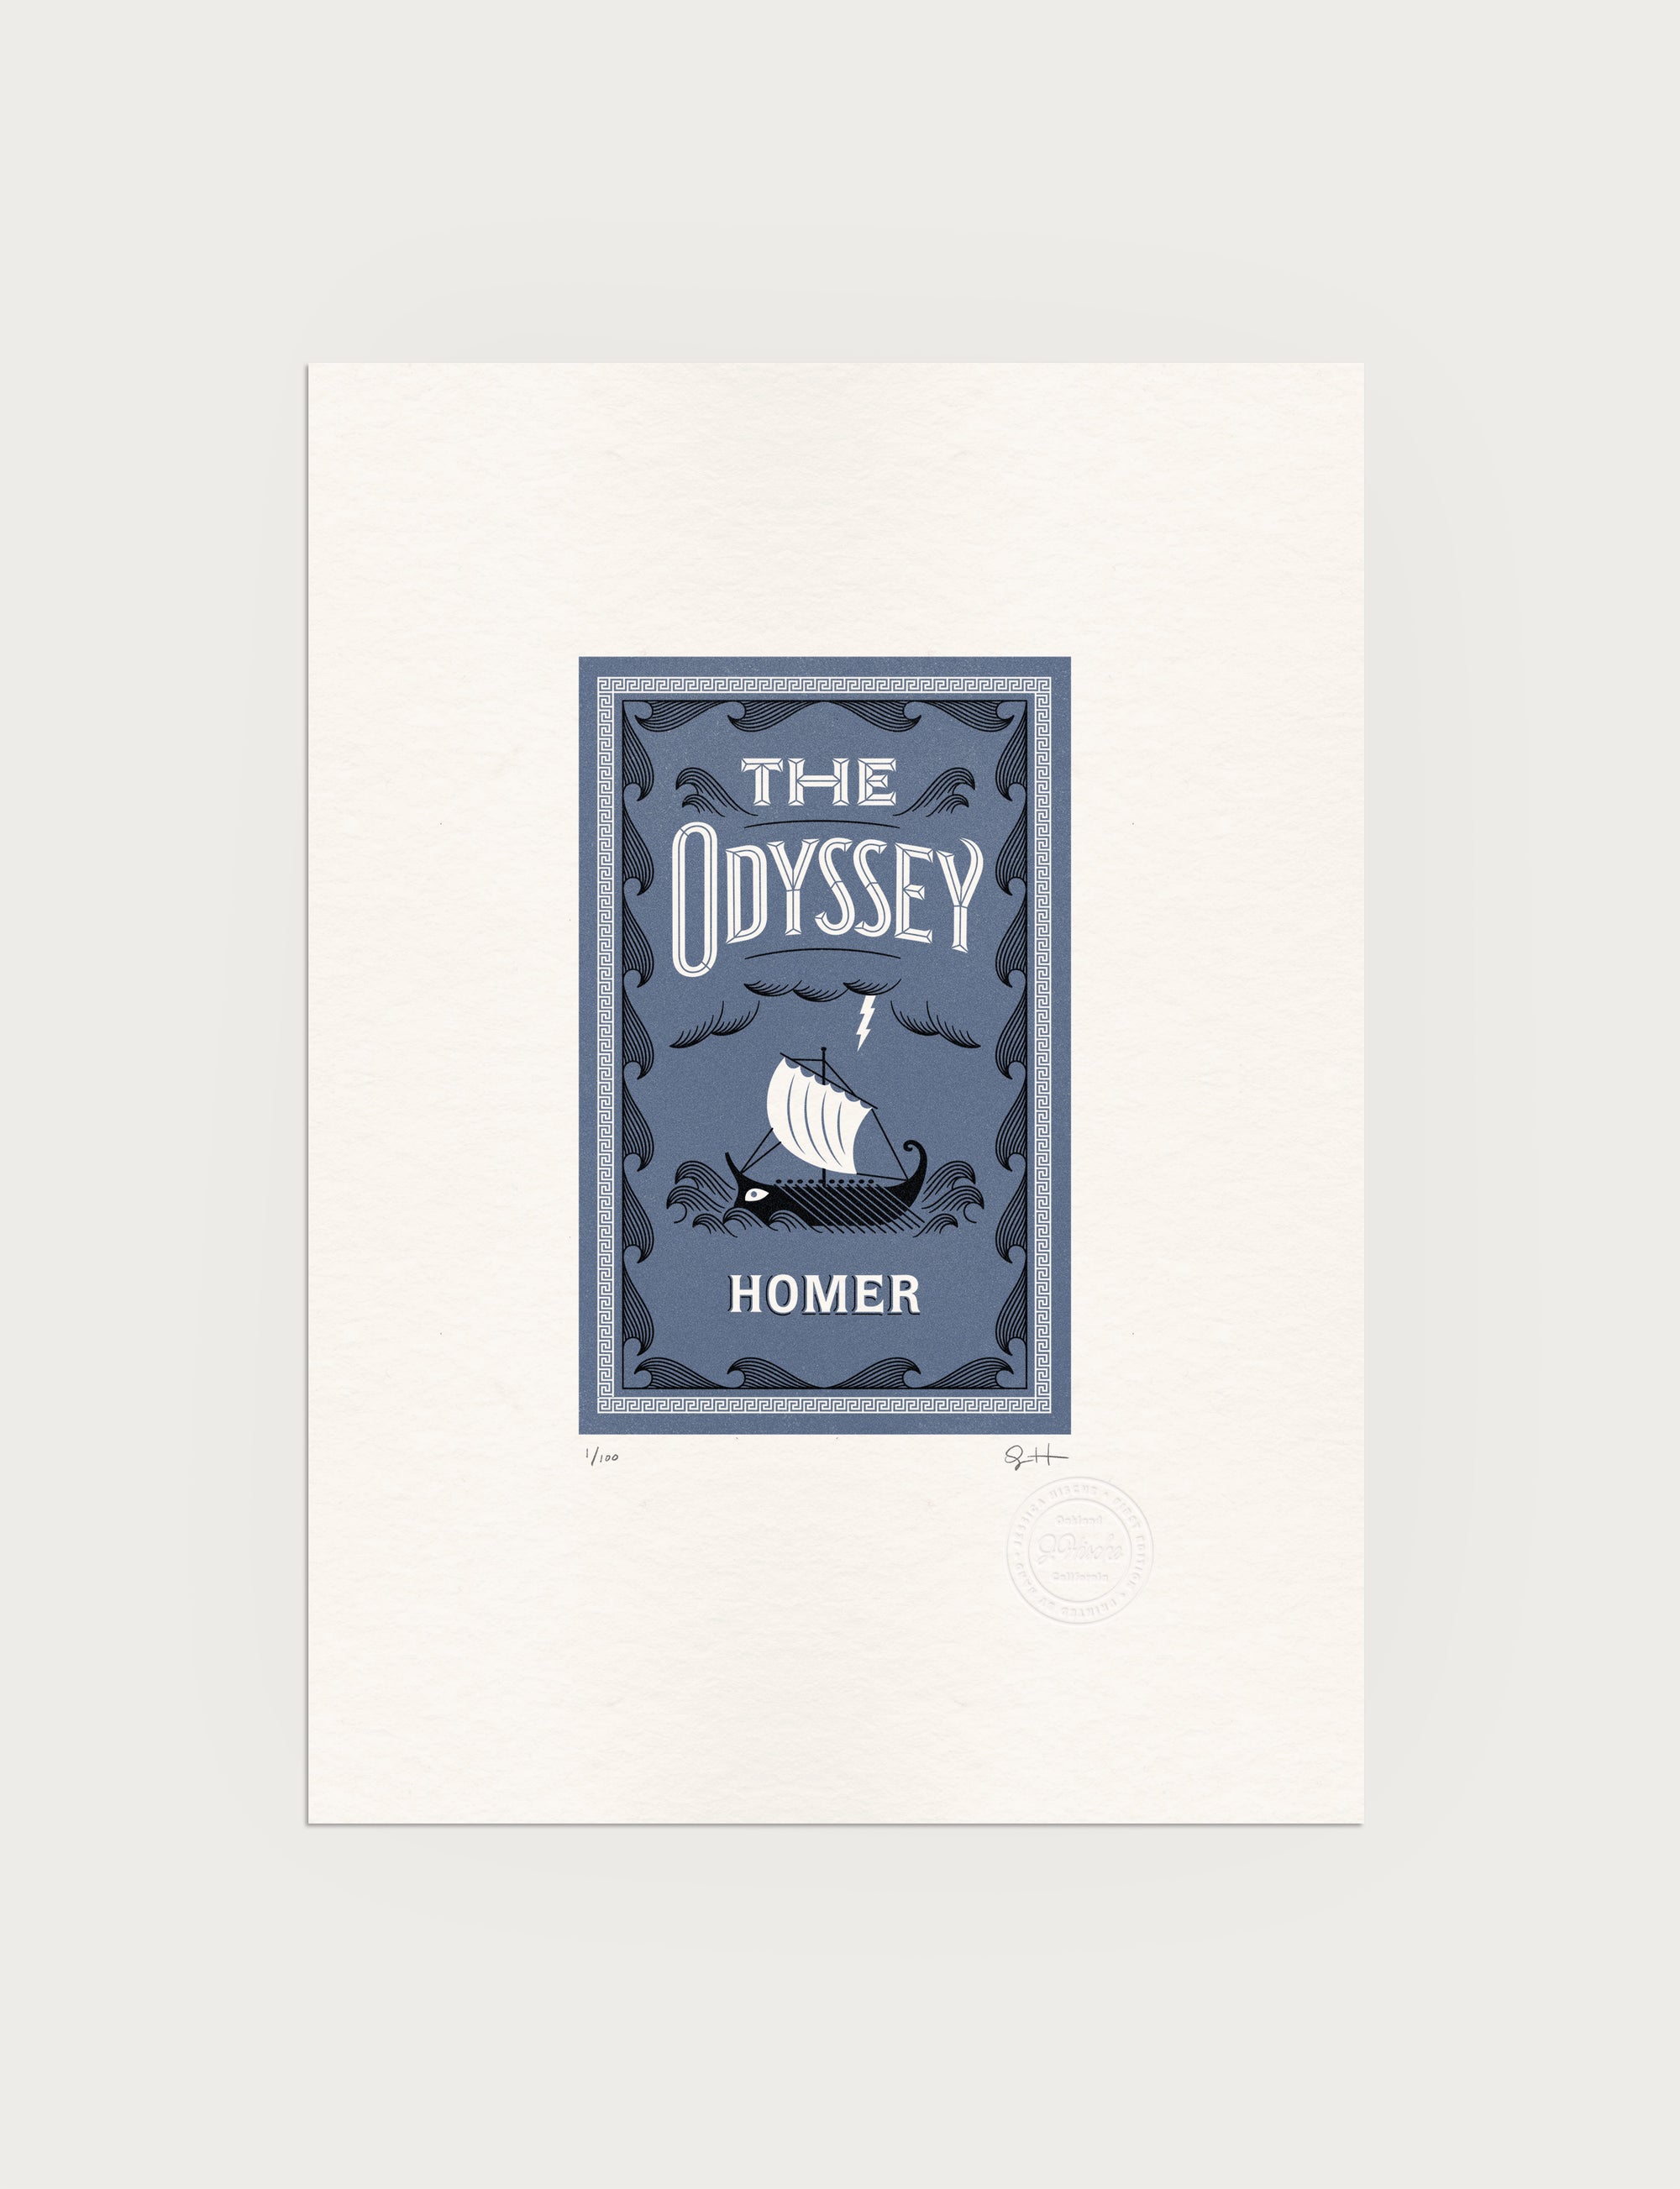 2-color letterpress print in blue and black. Printed artwork is an illustrated book cover of The Adventures of The Odyssey including custom hand lettering.